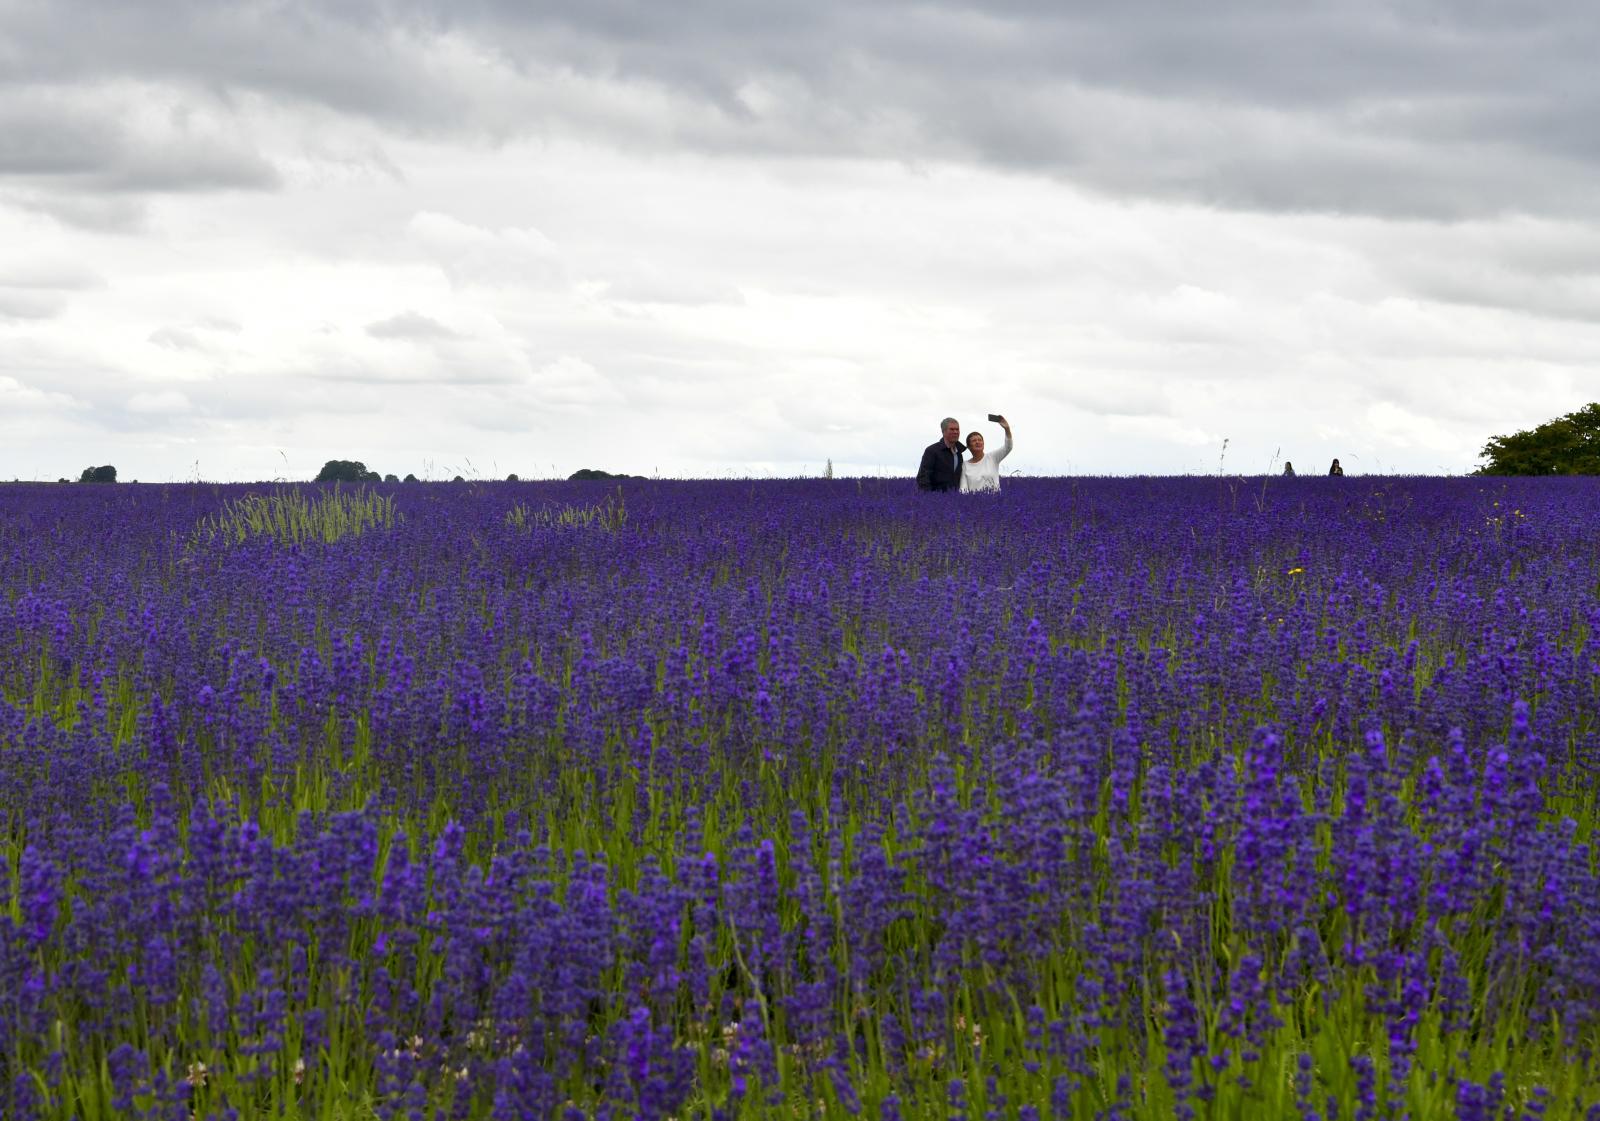 Image from Daily Life UK - Lavender fields - Cotswold, England